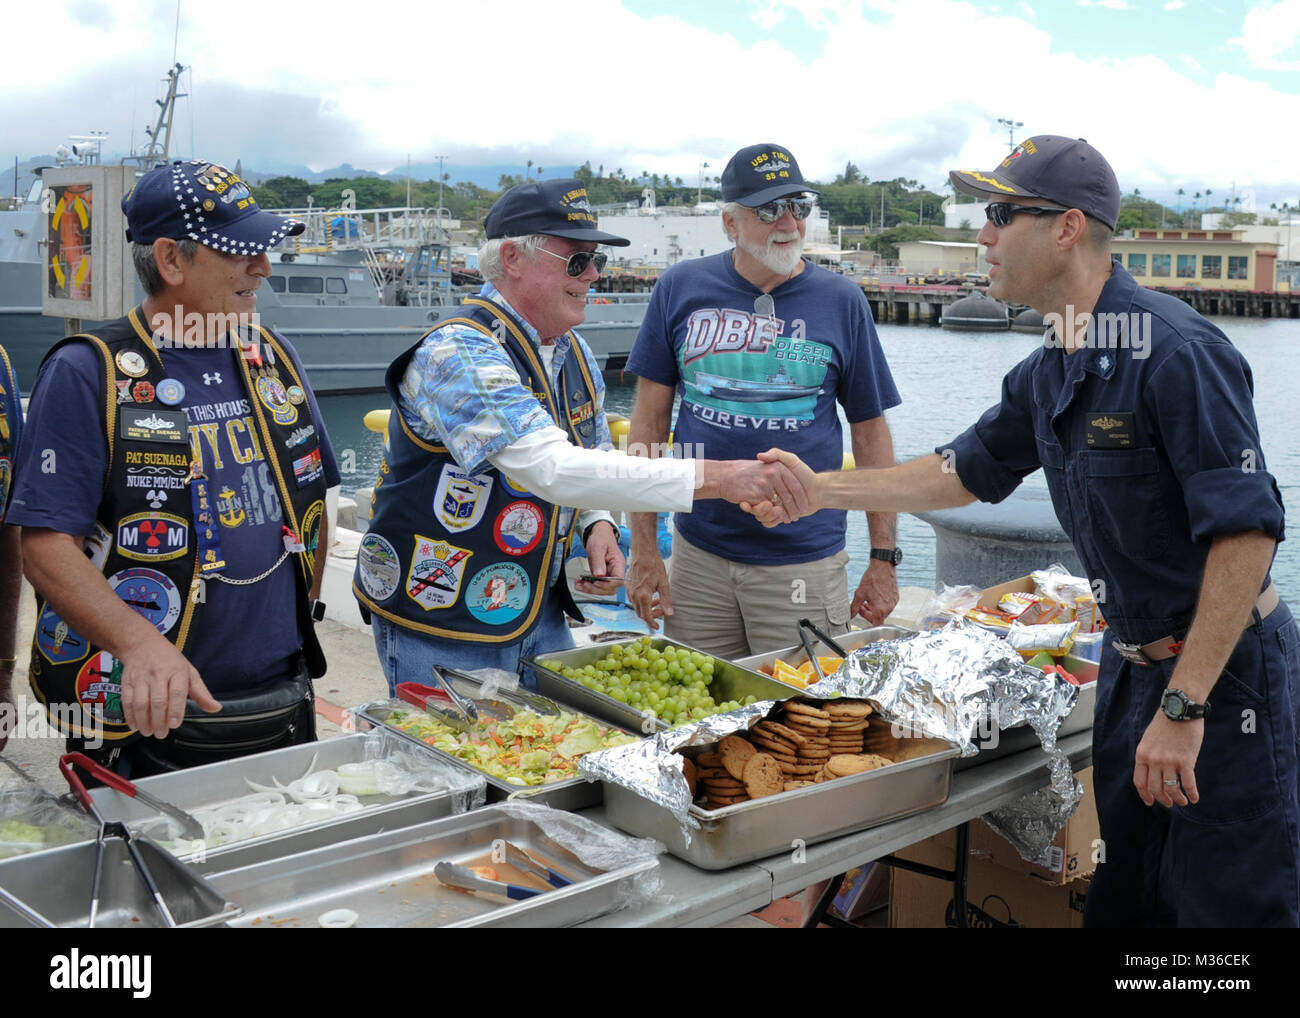 160606-N-KV911-058 PEARL HARBOR (June 6, 2016) Tim Seipp, a member of the Submarine Veterans Bowfin Base, bids Cmdr. Scott McGinnis, commanding officer of the Los Angeles-class fast-attack submarine USS Houston (SSN 713), farewell. Houston is en route to Puget Sound Naval Shipyard in Bremerton, Washington, to commence its inactivation process and decommissioning after 33 years of service. (U.S. Navy photo by Mass Communication Specialist 2nd Class Shaun Griffin/Released) Pearl Harbor Bids Aloha to USS Houston 27496061266 o Stock Photo